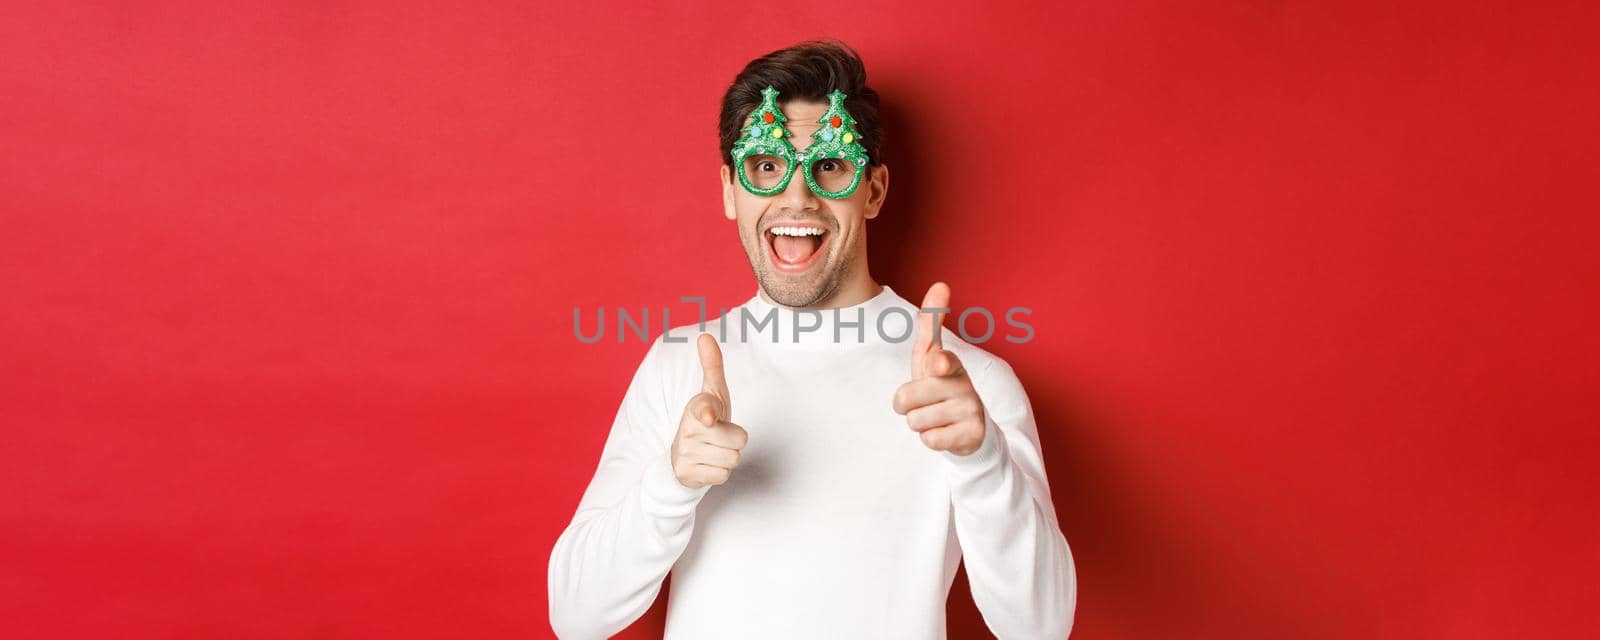 Joyful caucasian guy in party glasses and white sweater, smiling and pointing fingers at camera, wishing merry christmas and happy new year, standing over red background.